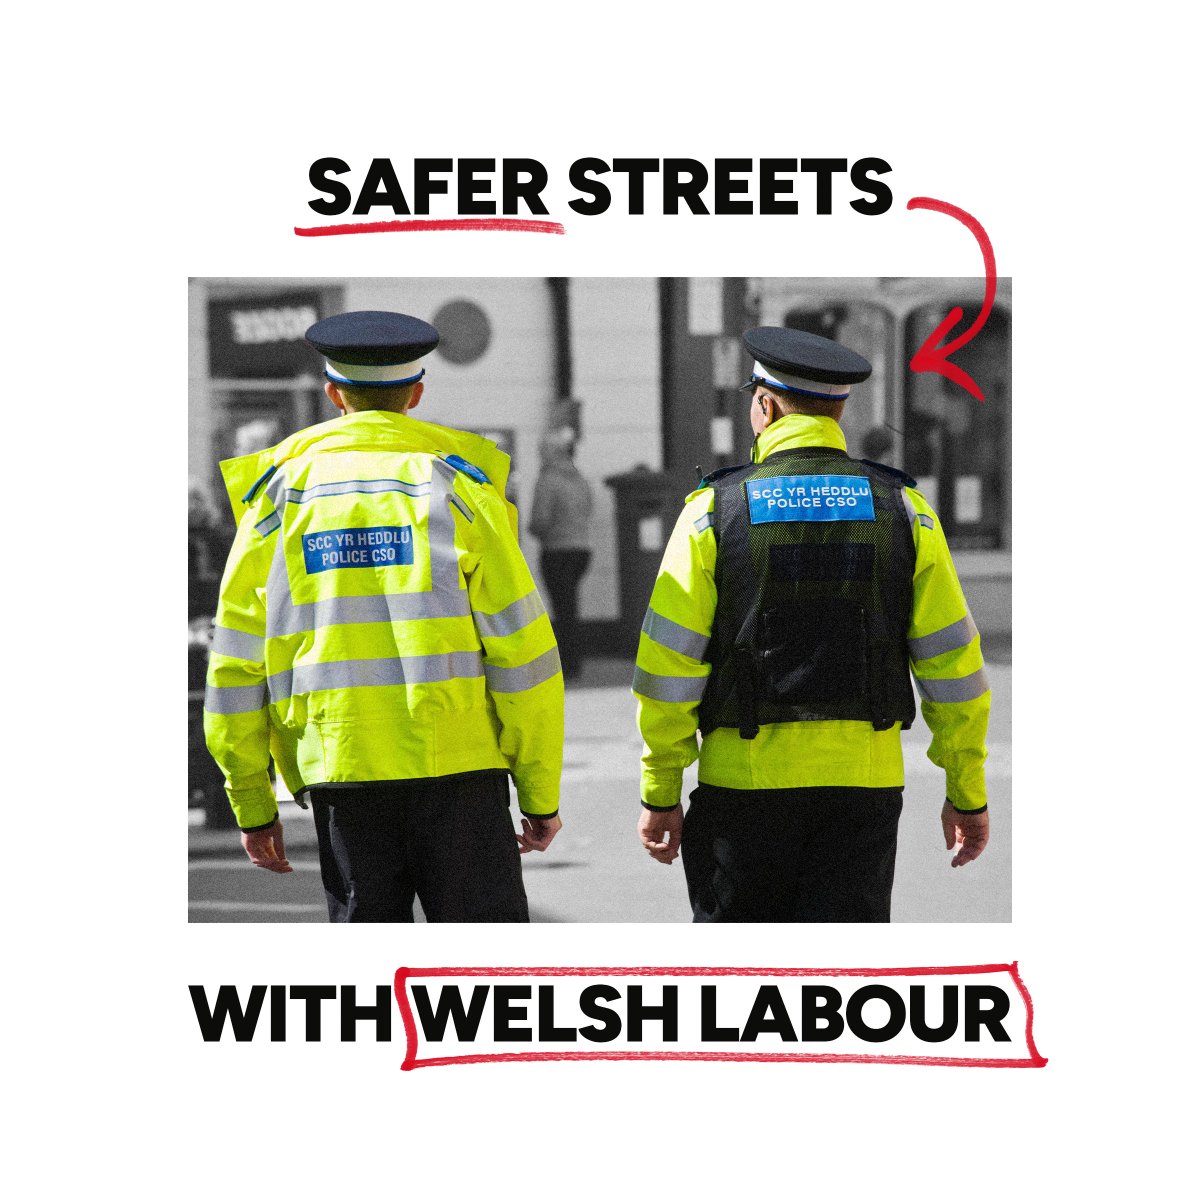 Today you get to have your say on who will be the next Police and Crime Commissioner for Gwent. Here in Gwent, the Labour candidate is Jane Mudd.